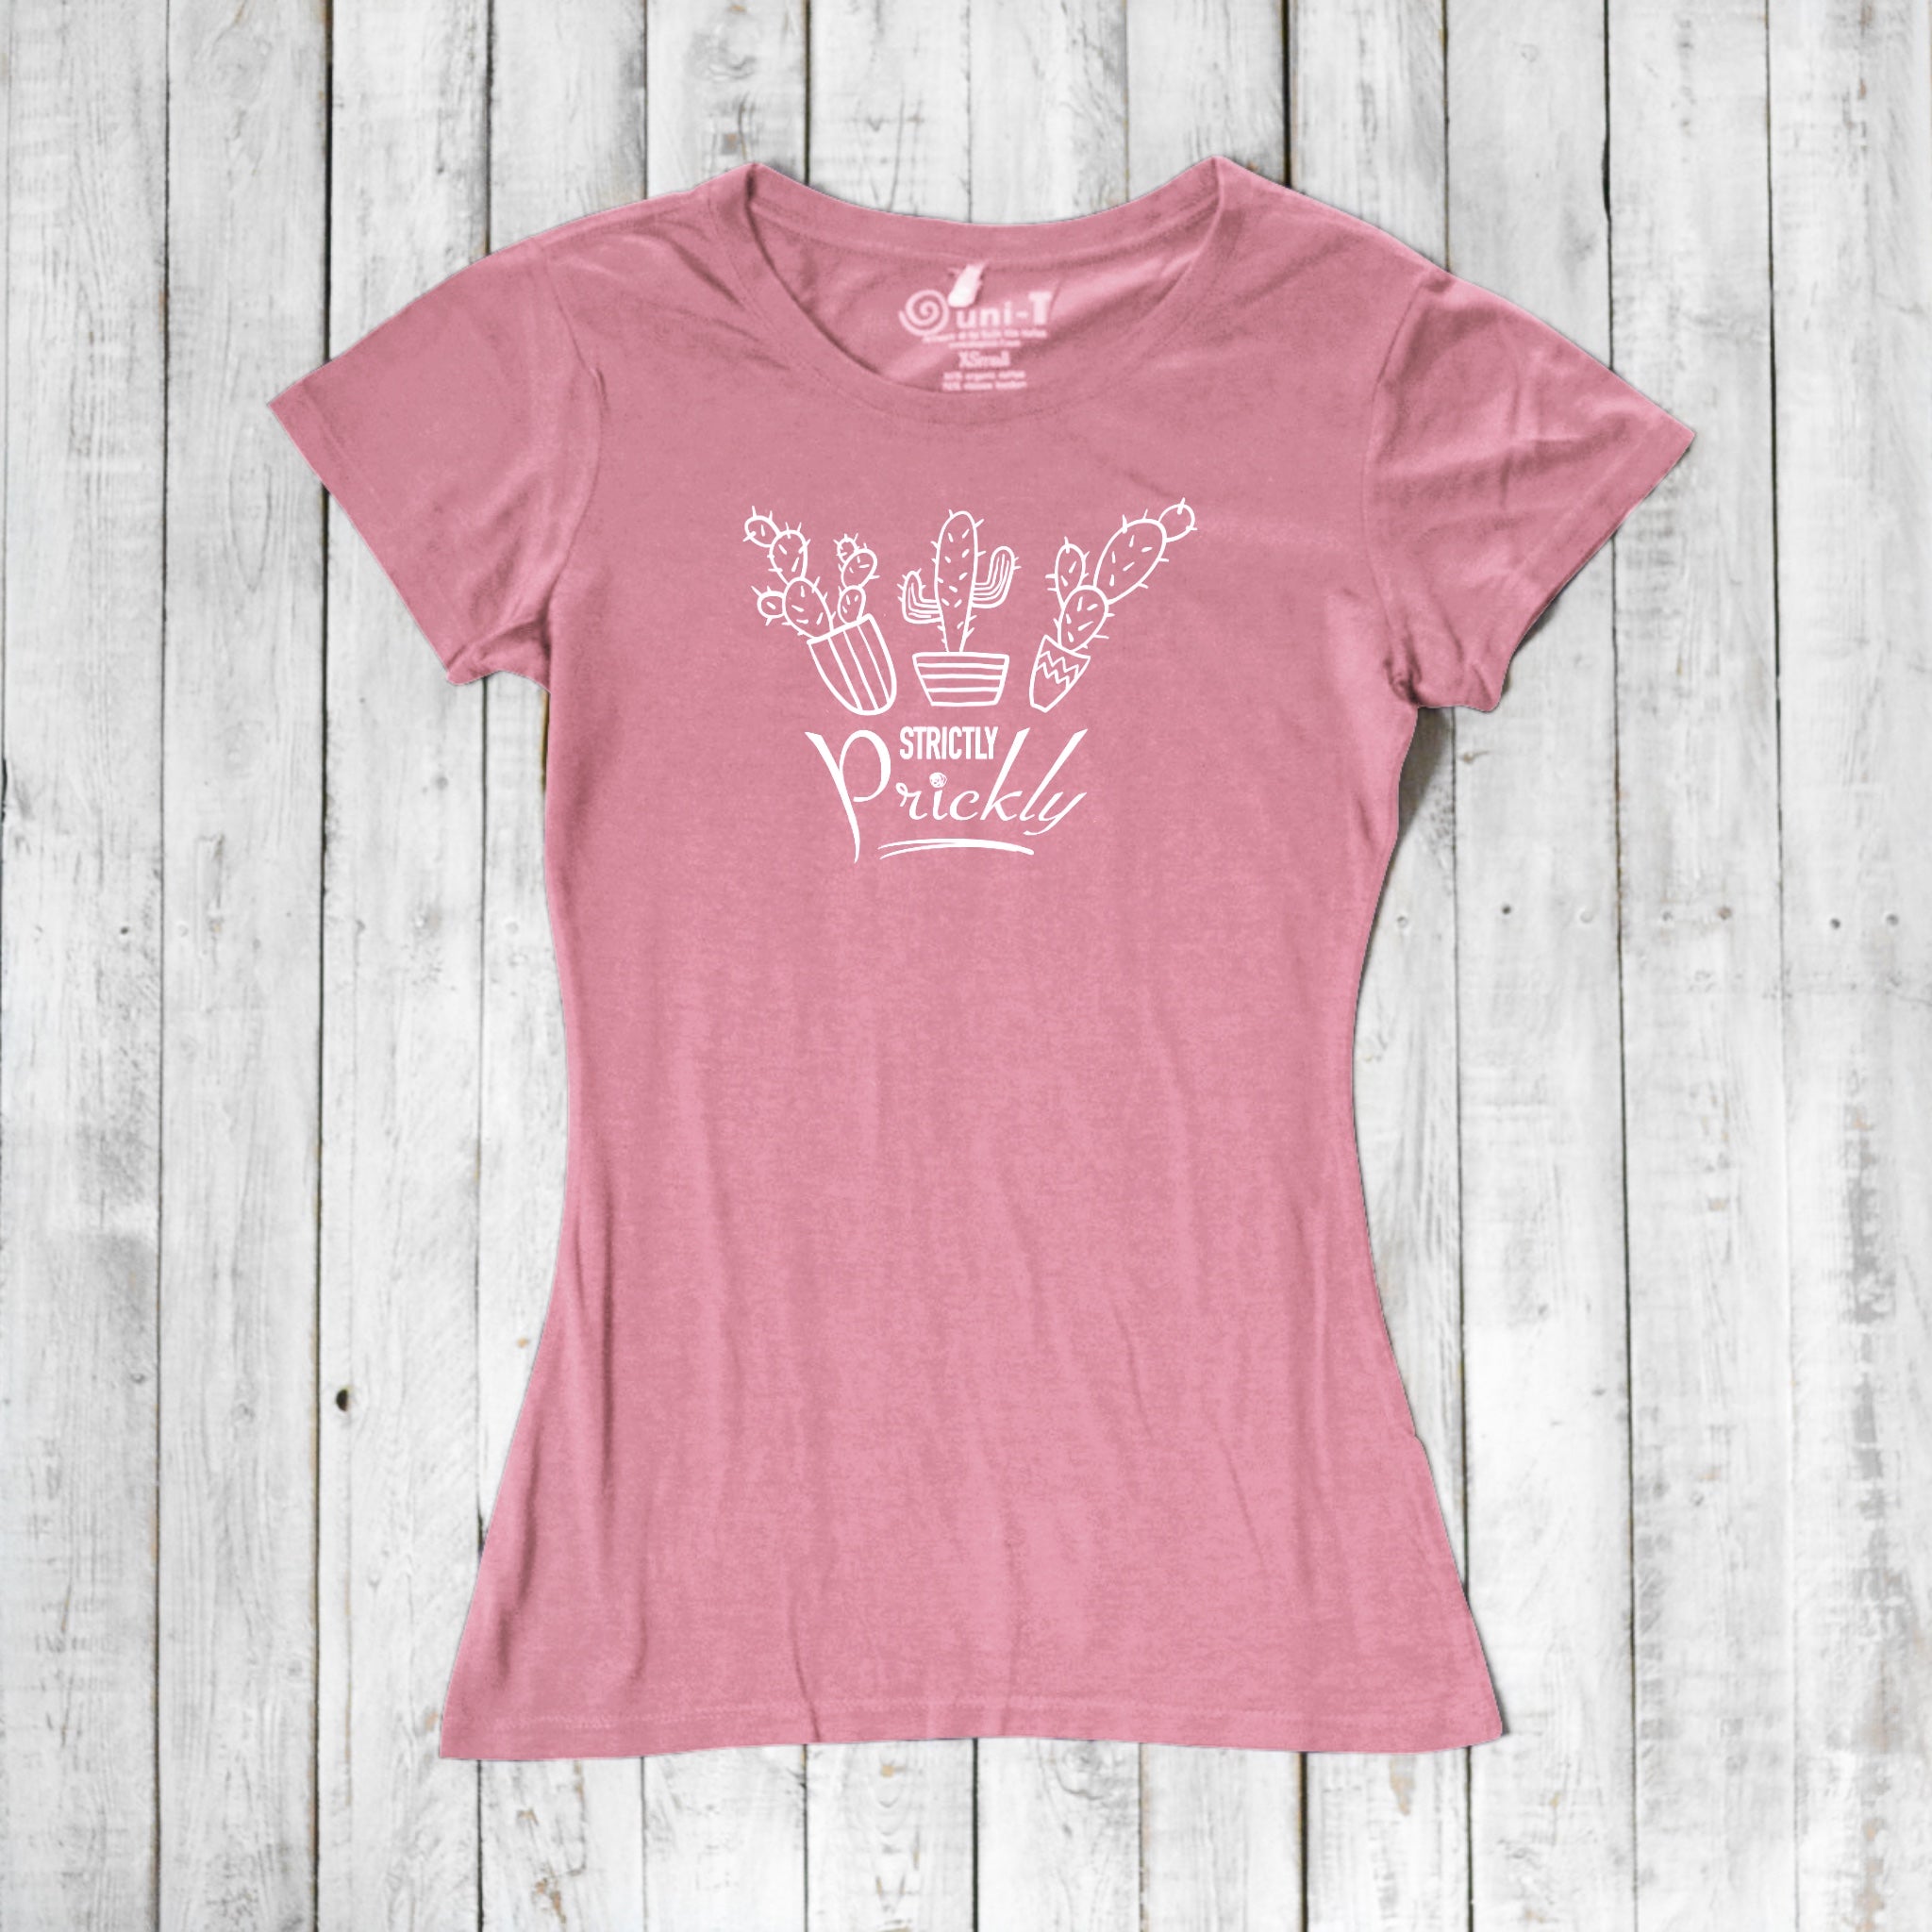 Cactus T-Shirt for Women - Strictly Prickly Uni-T